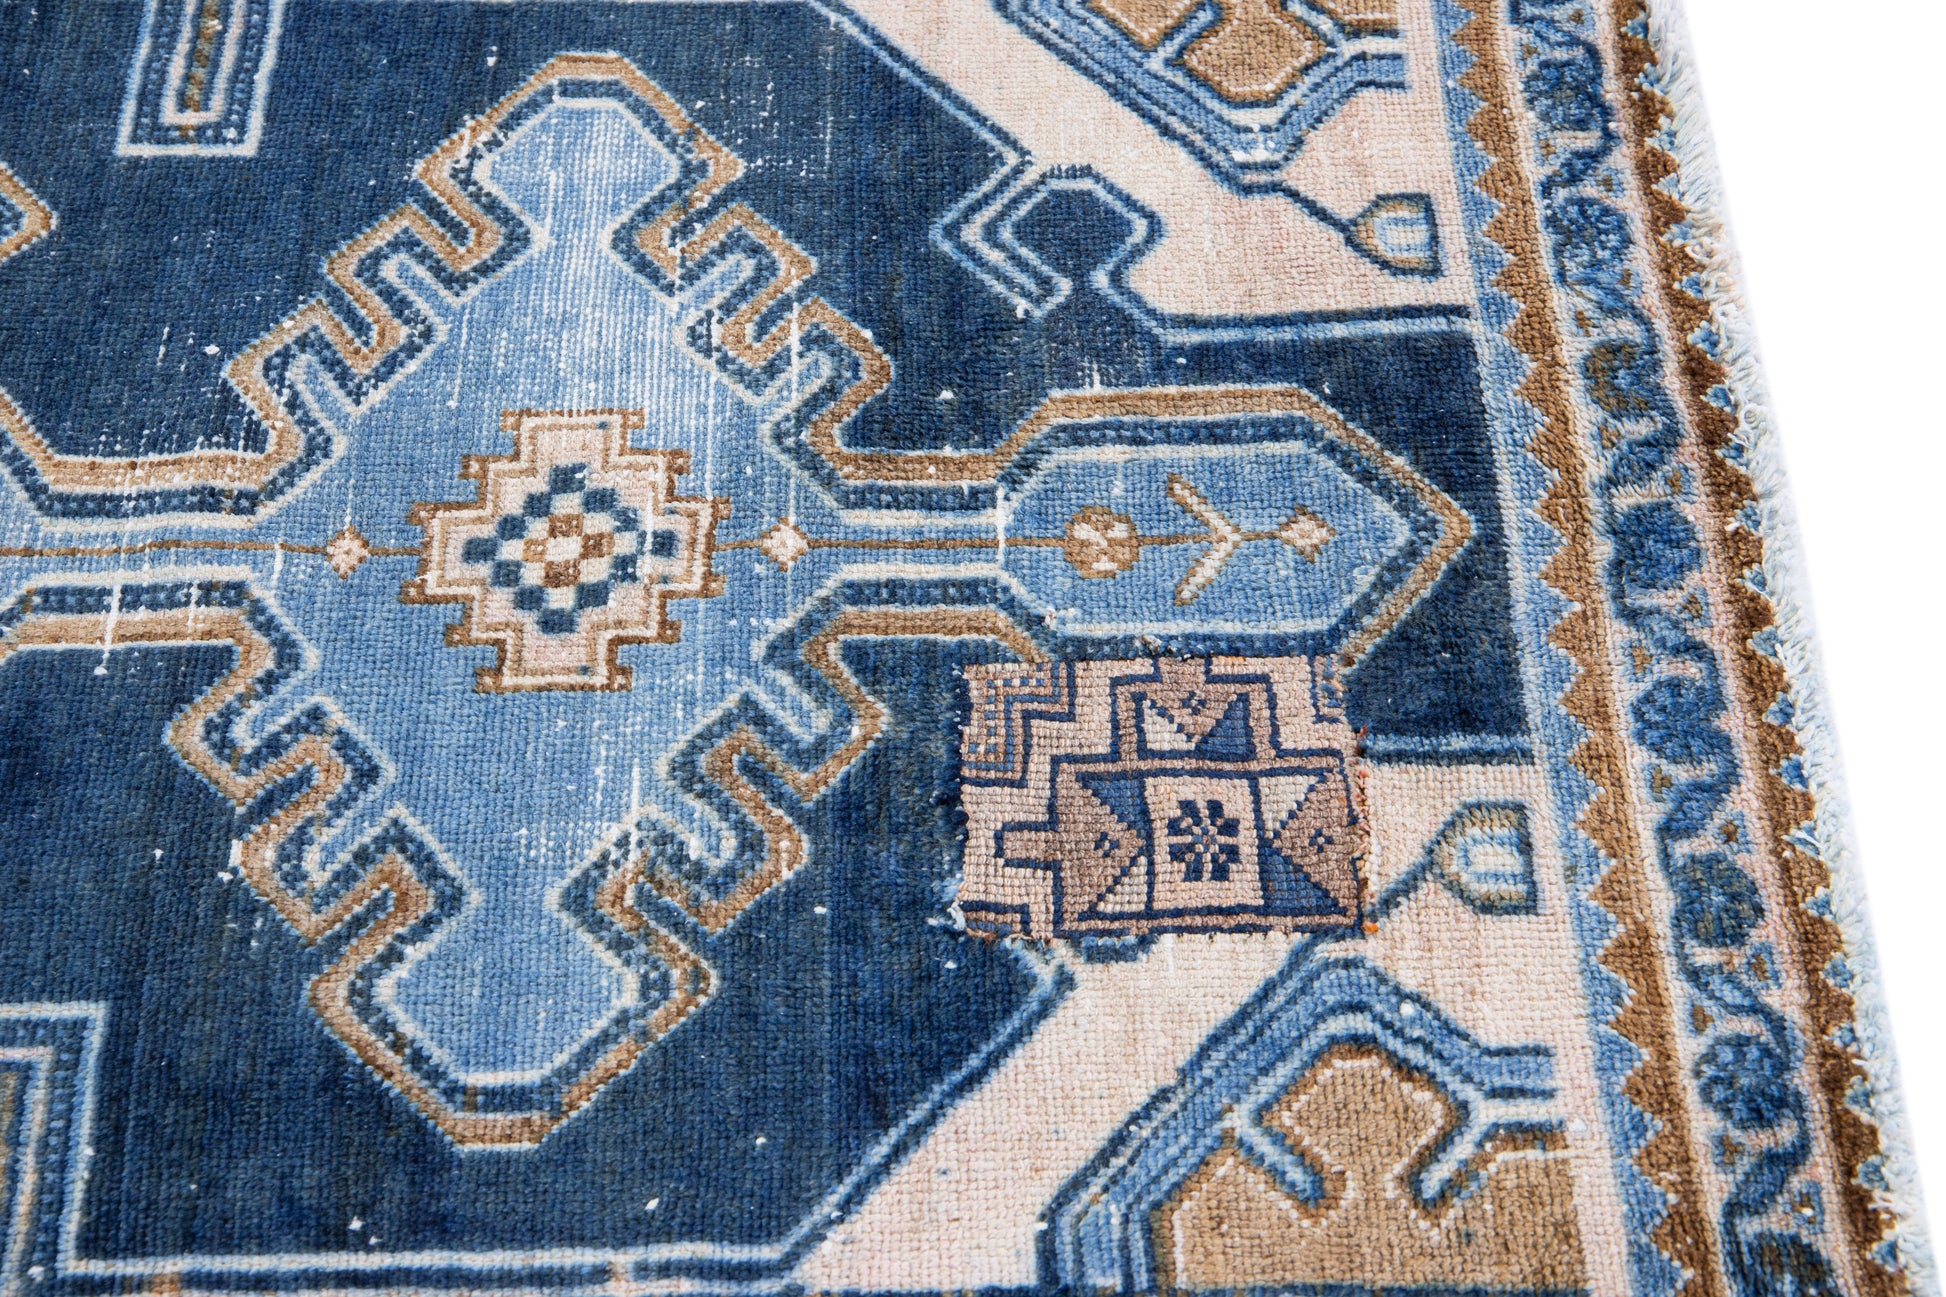 Gorgeous Blue and Turquoise Handmade Wool Runner Rug - 3'2'' x 8'7"